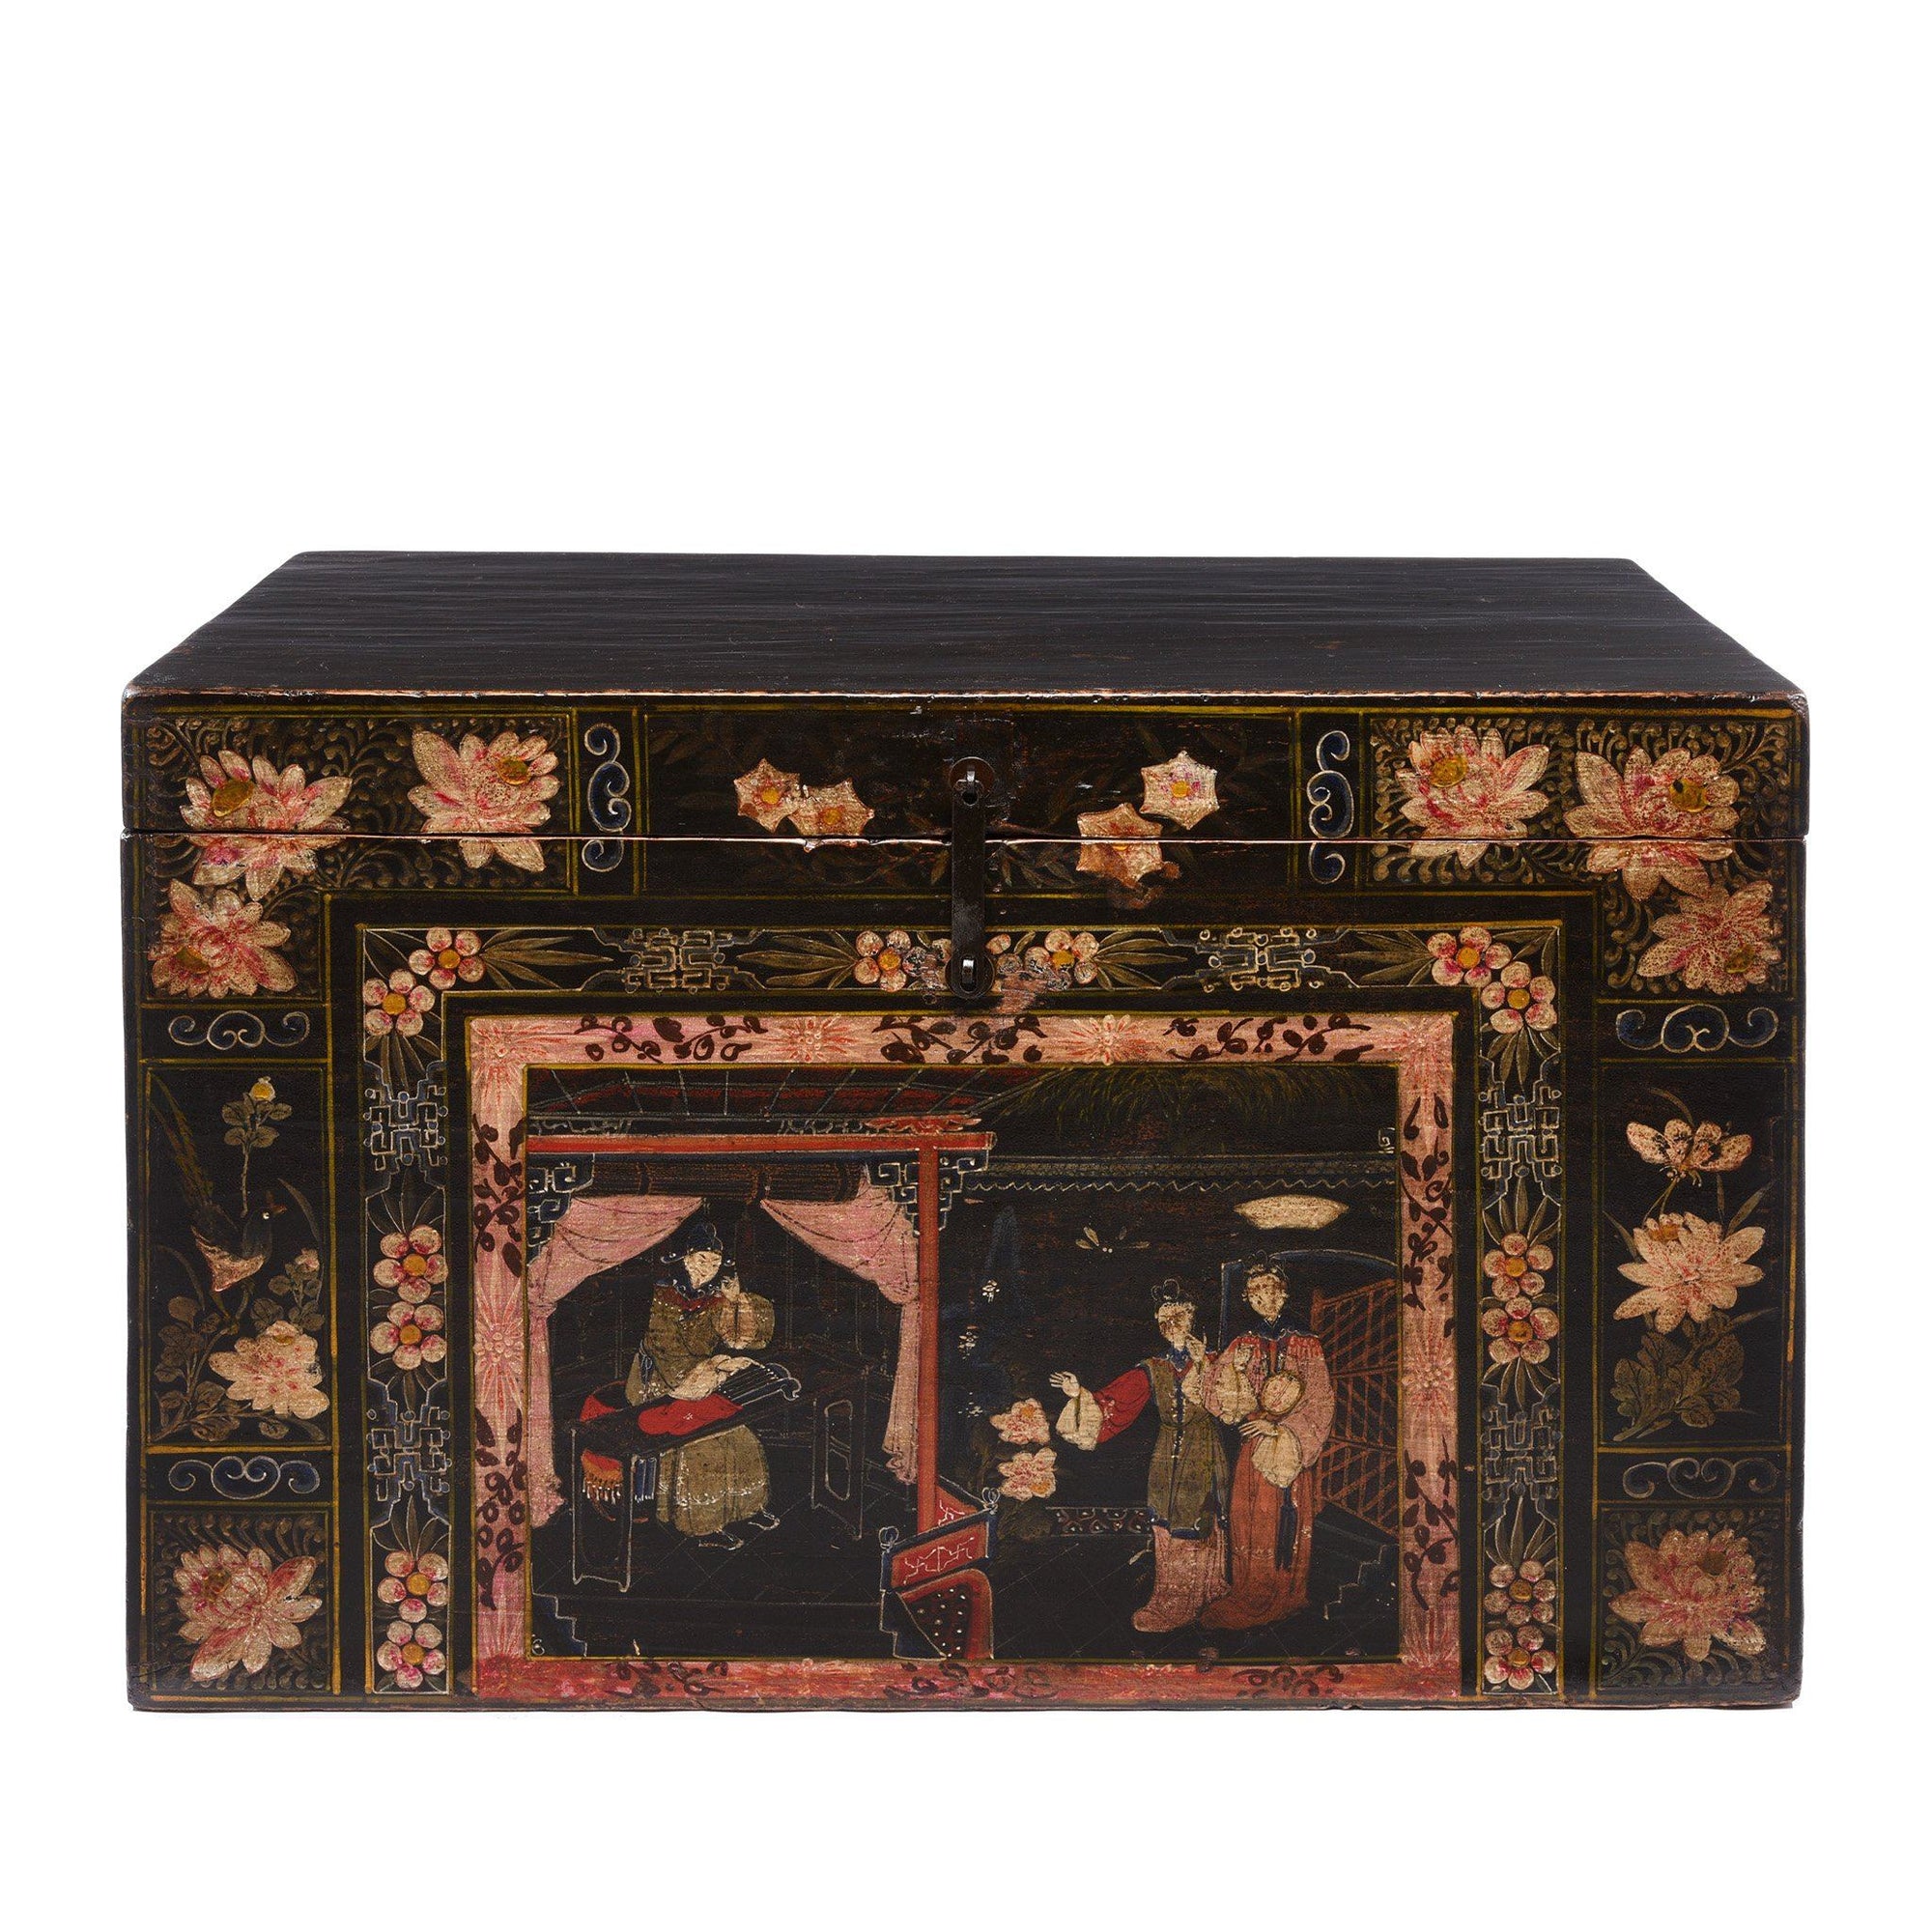 Painted Opera Chest From Shanxi - 19thC | Indigo Antiques